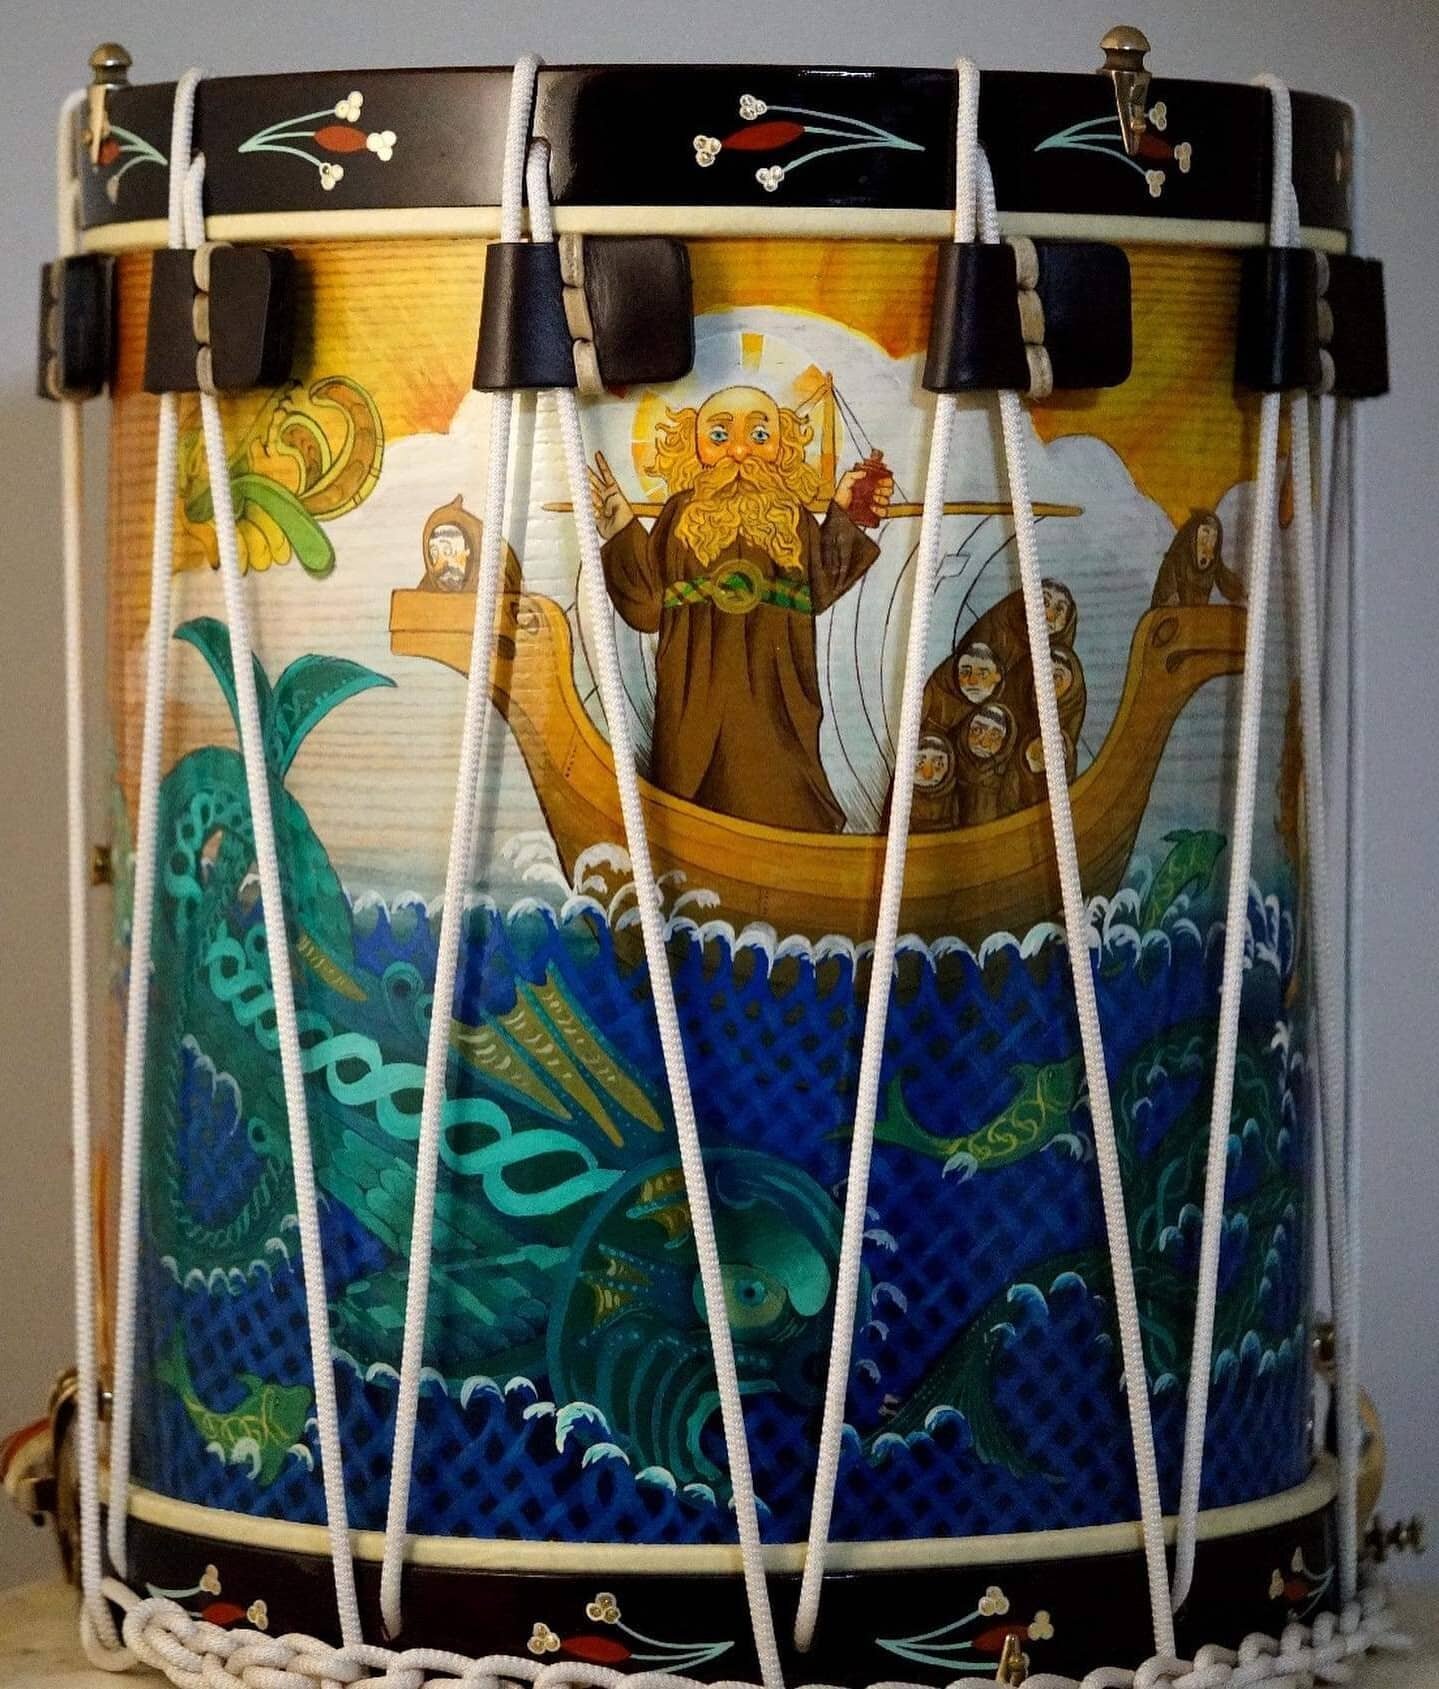   Completed earlier this year for a Loyal Drums endorser. After working through designs and composition ideas with the client, the drum was painted showing a vibrant seascape in blues and greens, under a brilliant golden sunrise to depict the journey